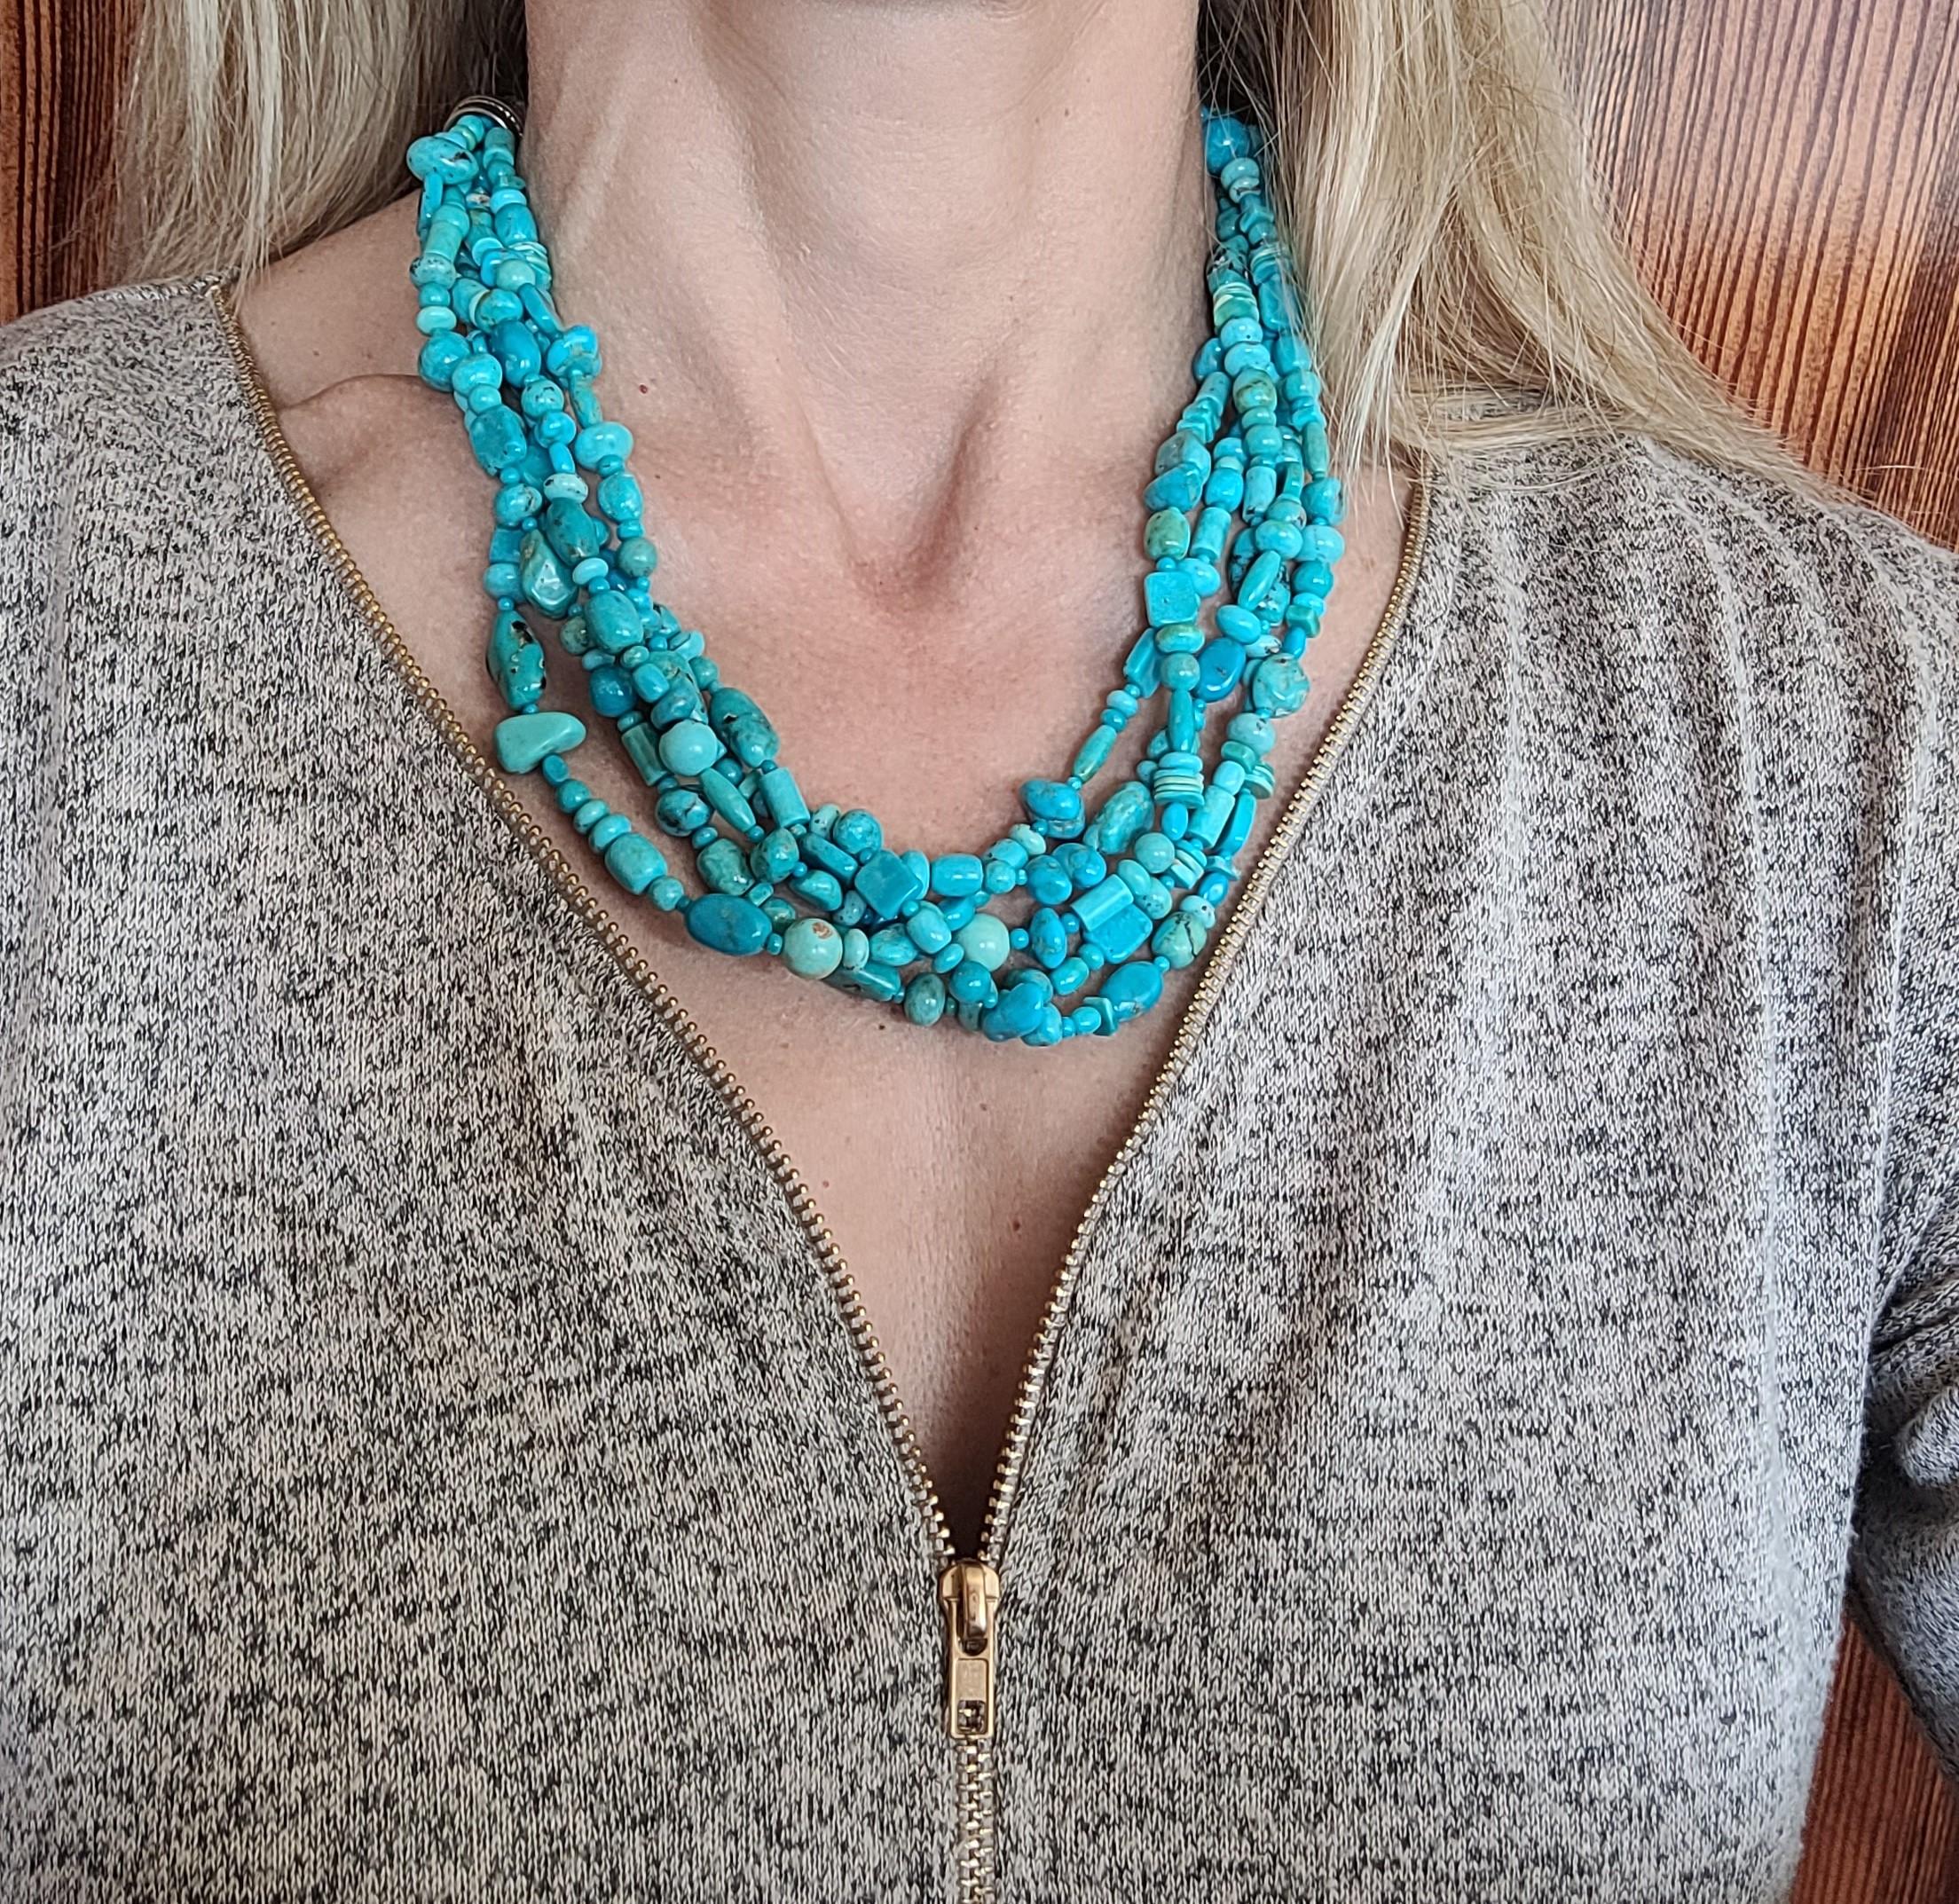 Lovely 20-inch multi-strand turquoise necklace with five beautiful strands of vivid blue beads attached to a decorative silver clasp secured with a lobster clasp. Overall this necklace is in very good condition. Please let us know if you have any